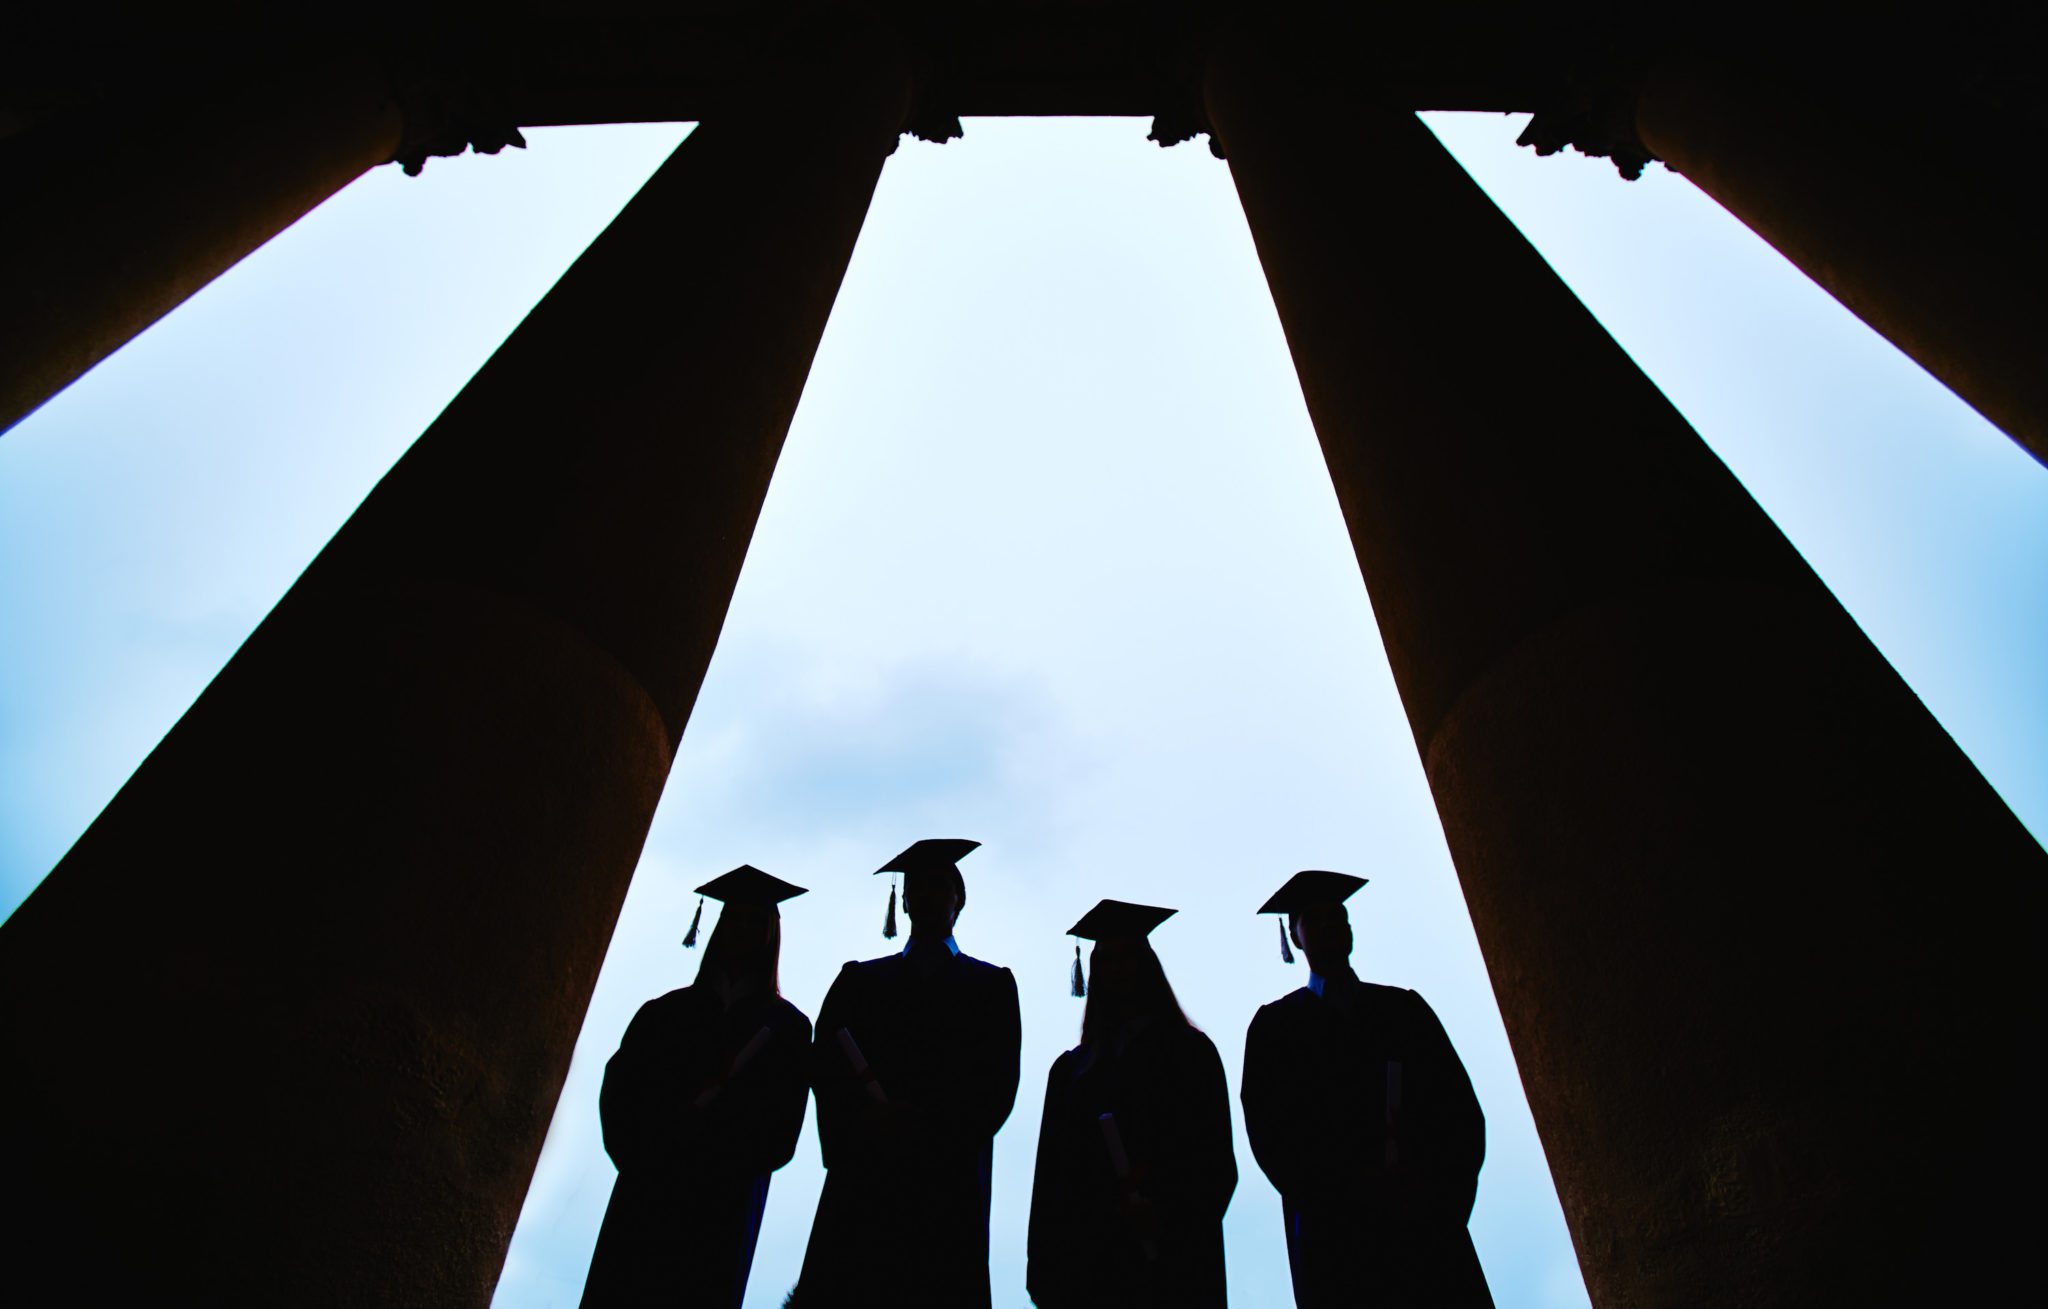 Image of 4 college student grads with commencement caps on in silhouette